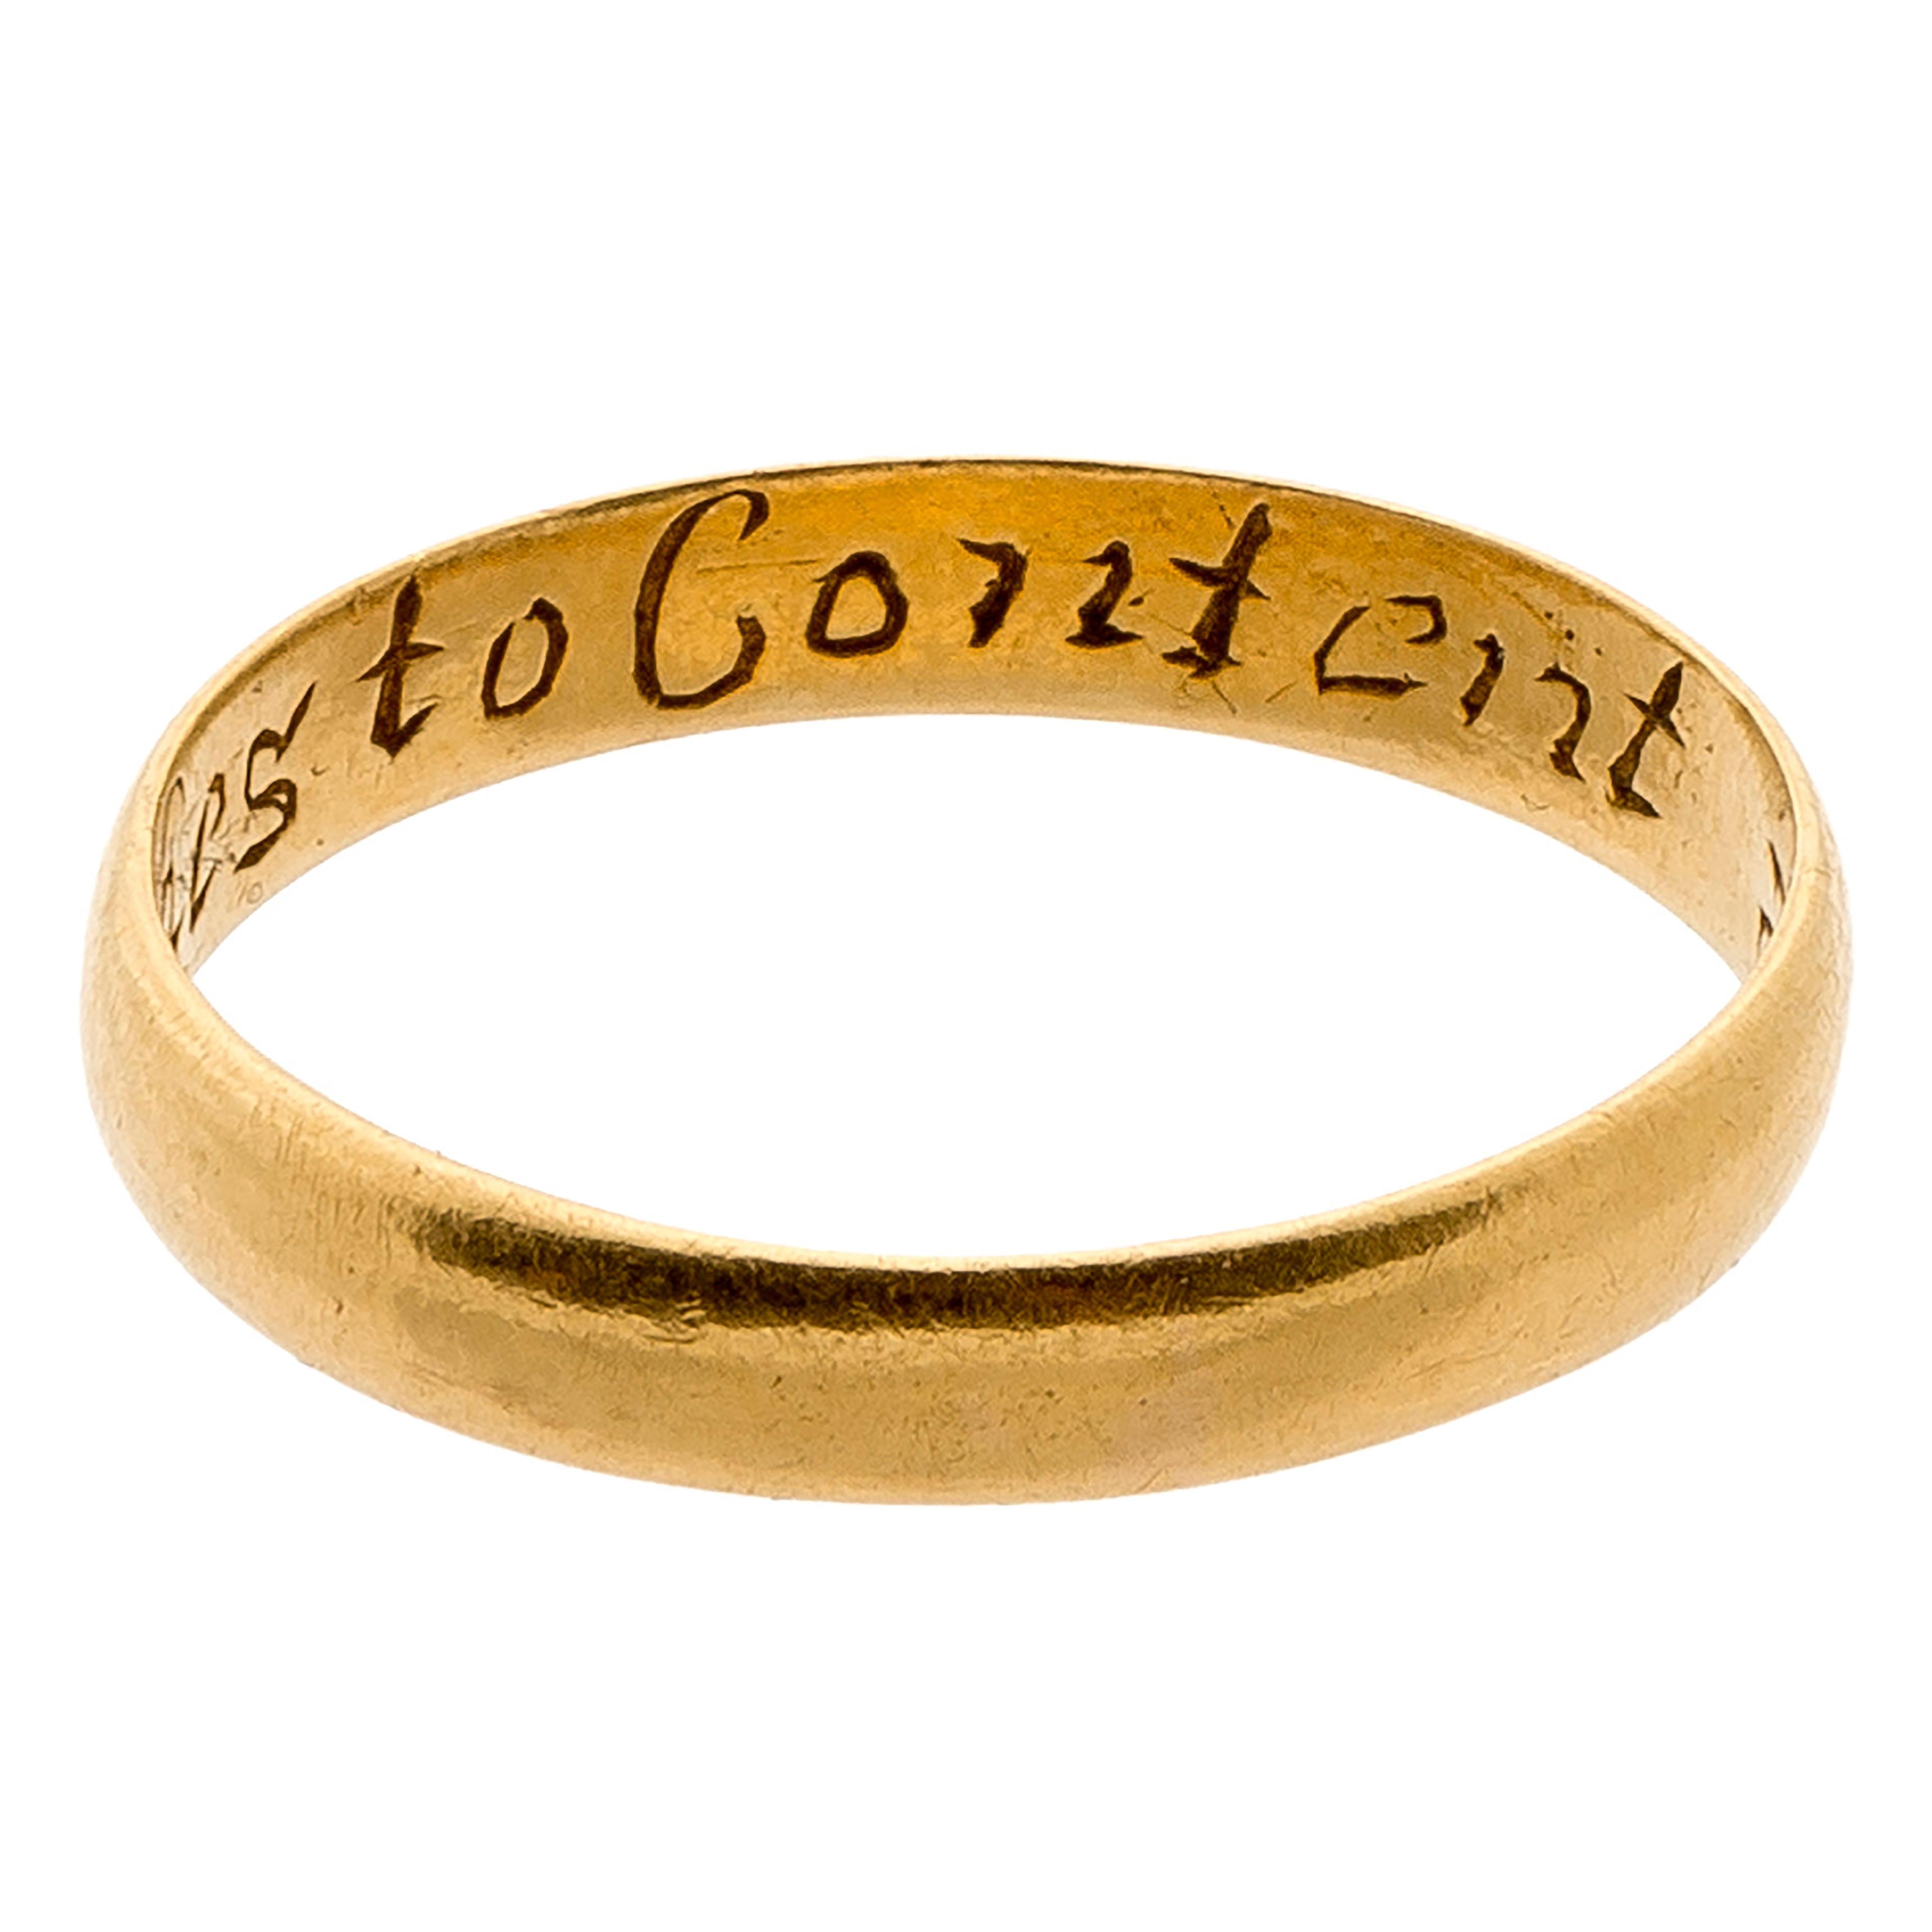 Posy Ring, “No riches to content”
England, 18th century
Gold
Weight 2.8 gr.; circumference 60.98; US size 9.5, UK size S ¾ 

Gold band with D-section, plain on the exterior and on the interior are probably the initials of the giver “DMI” in capital